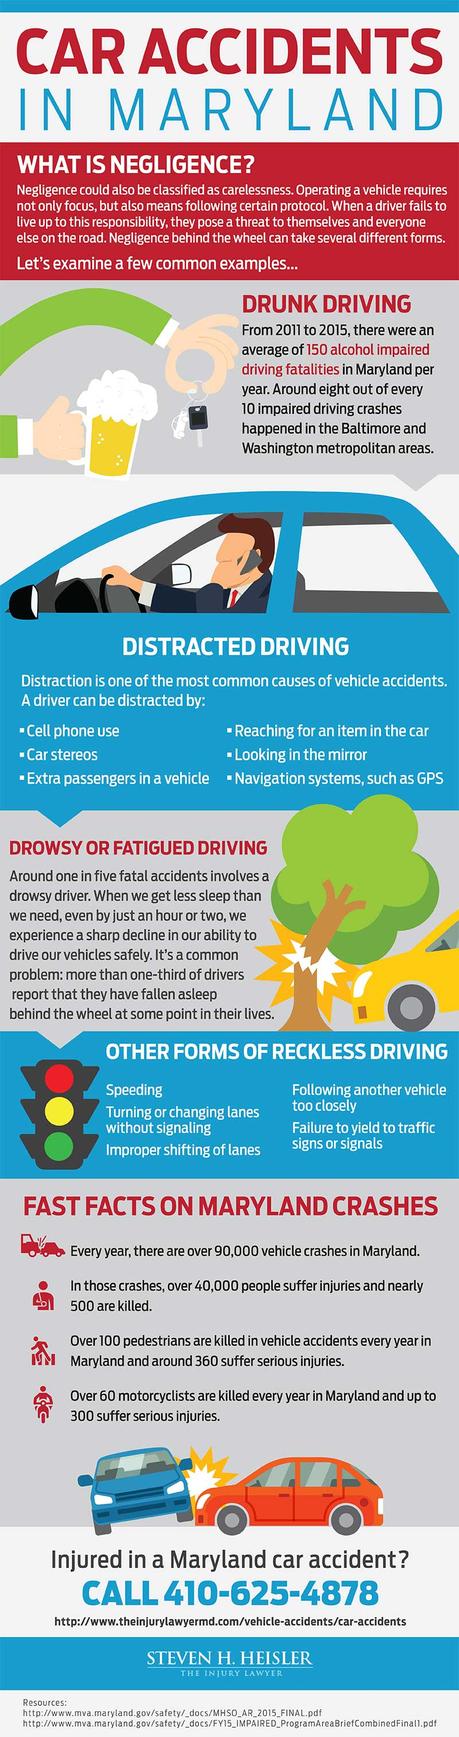 Car Accidents in Maryland infographic